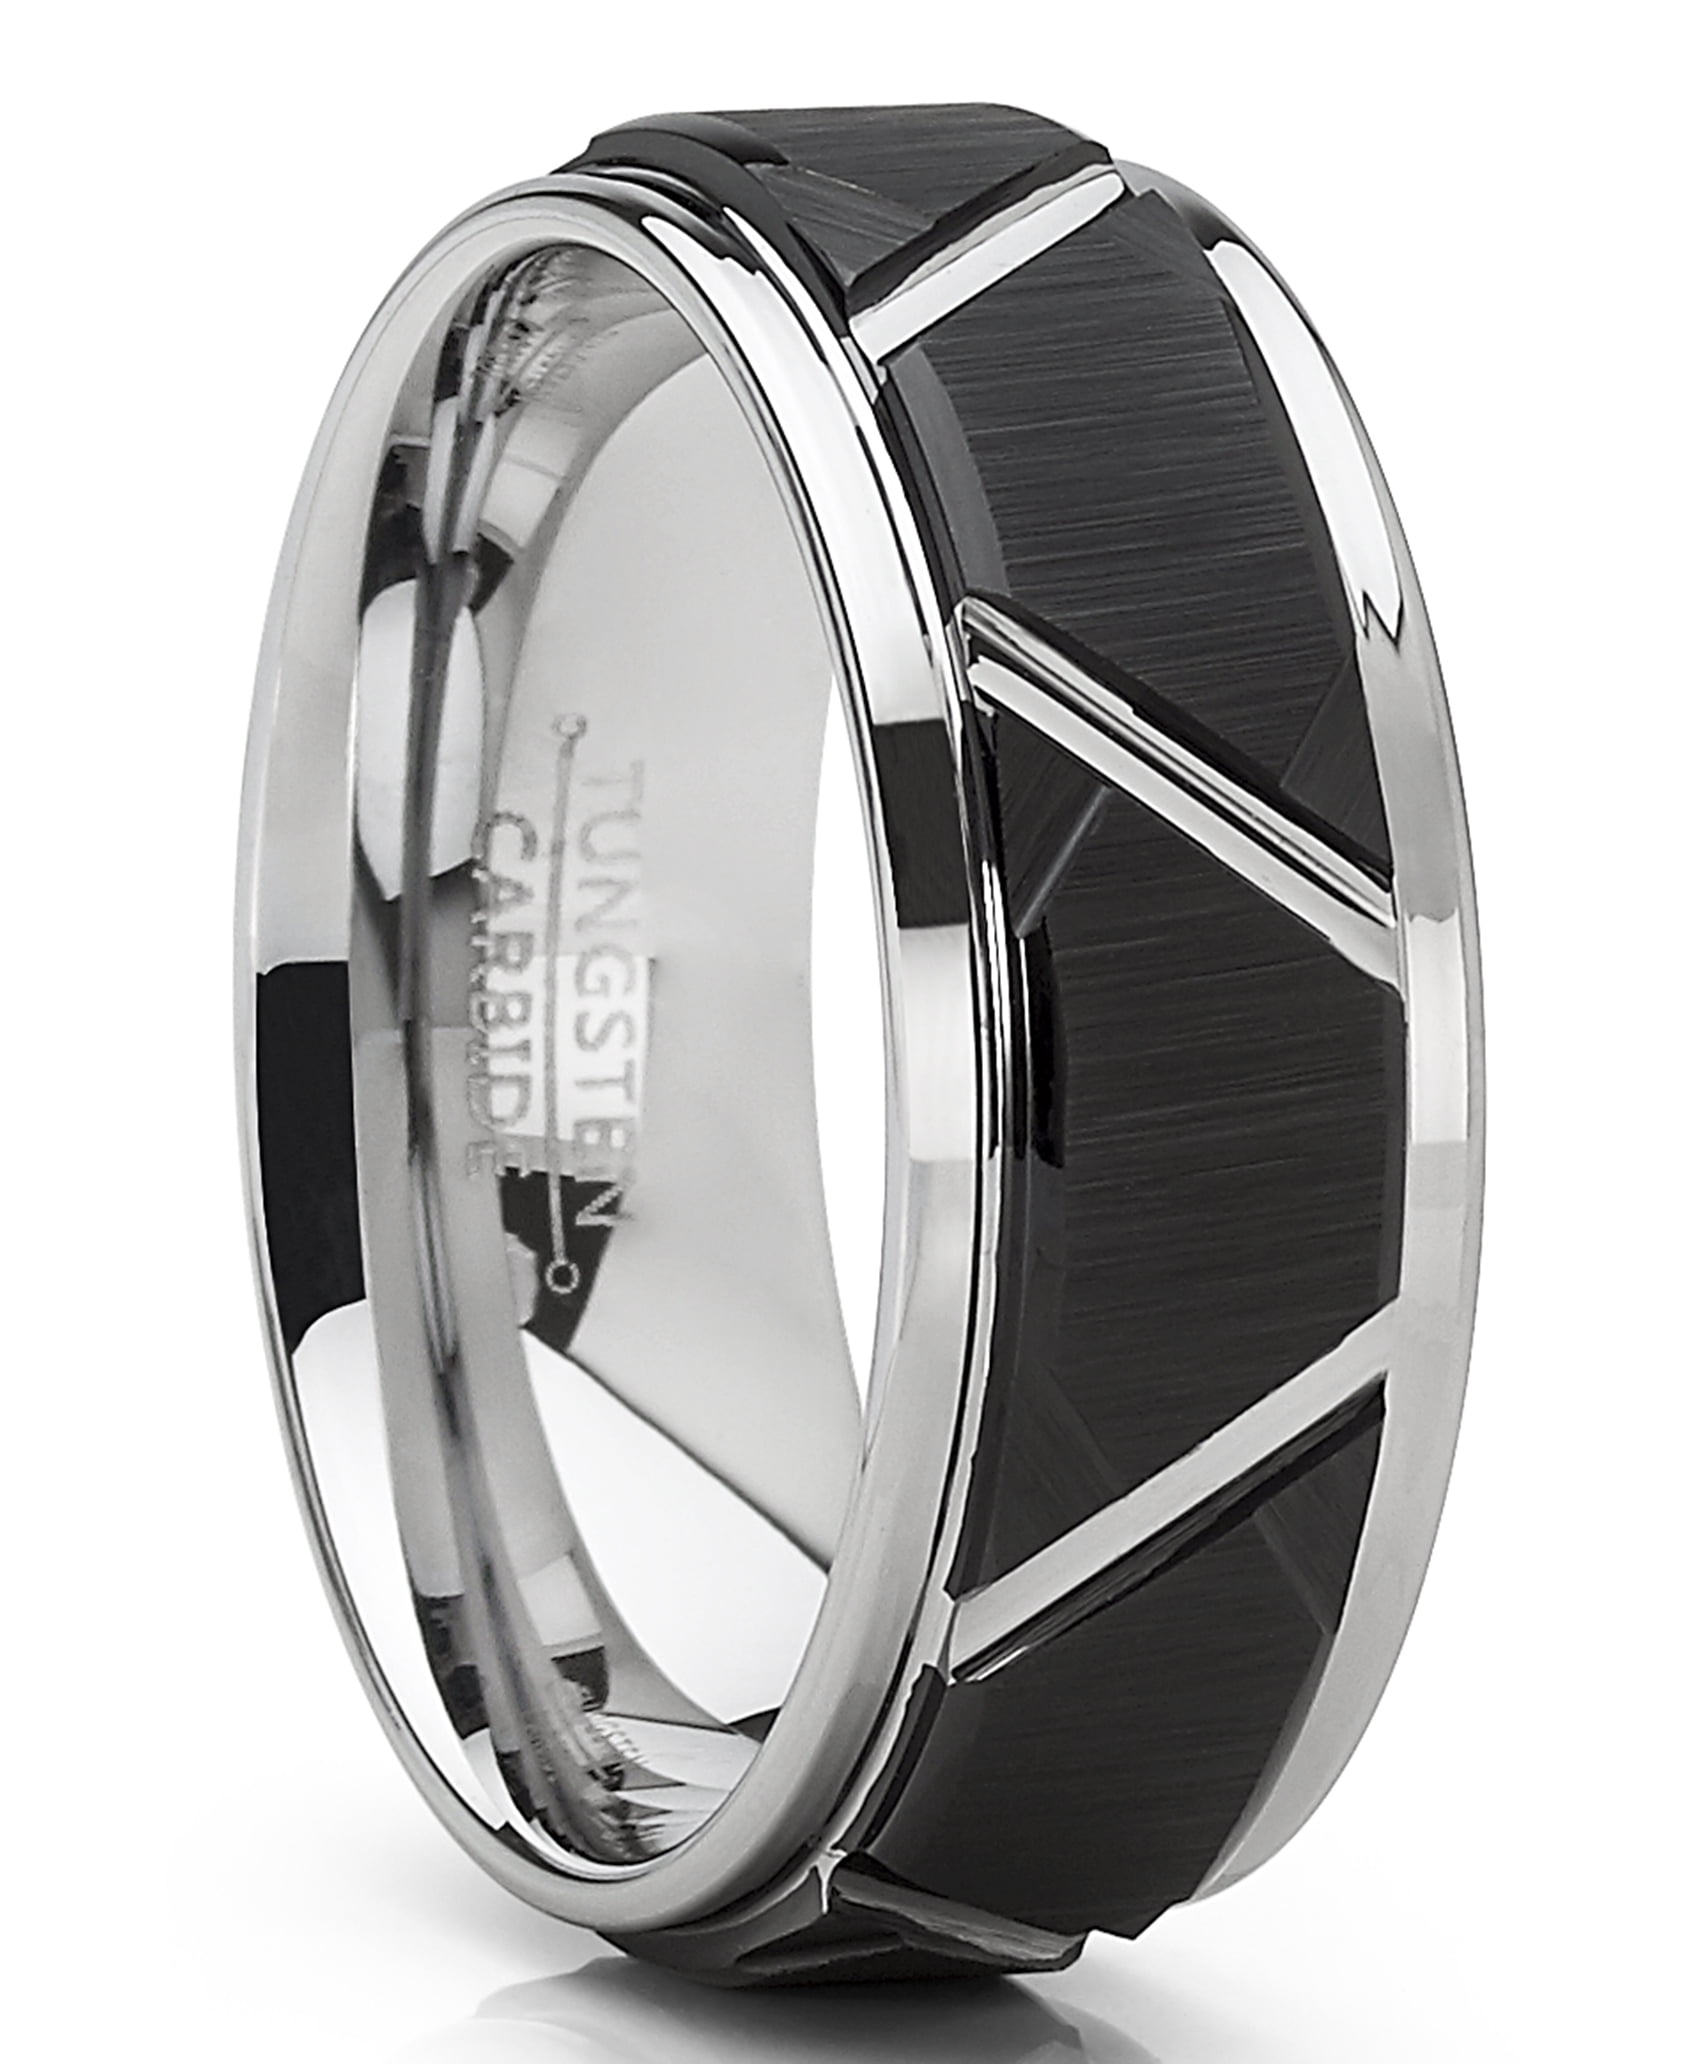 Ringwright Co Mens Tungsten Carbide Wedding Ring 8mm Black Faceted